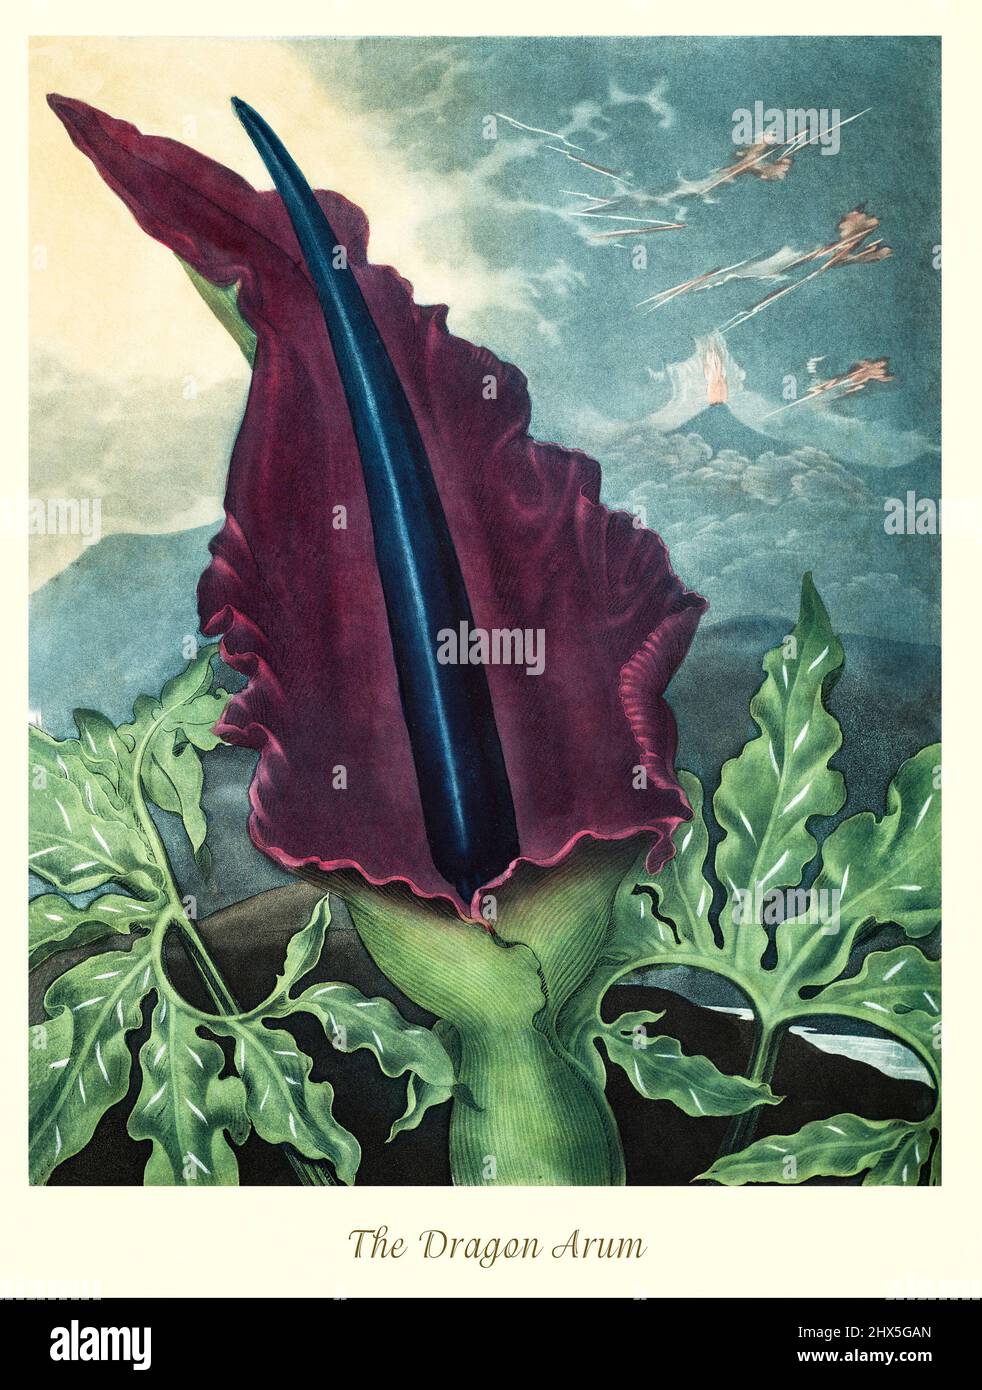 An early 19th century illustration of the Dragon Arum, an aroid flowering plant in the genus Dracunculus and family Araceae. The herbaceous perennial is endemic to the Balkans, extending as far as Greece, Crete, and the Aegean Islands, and also to the south-western parts of Anatolia. This artwork for Robert John Thornton's 'The Temple of Flora' in 1807, was printed, for the publisher, by T. Bensley, London, England. Stock Photo